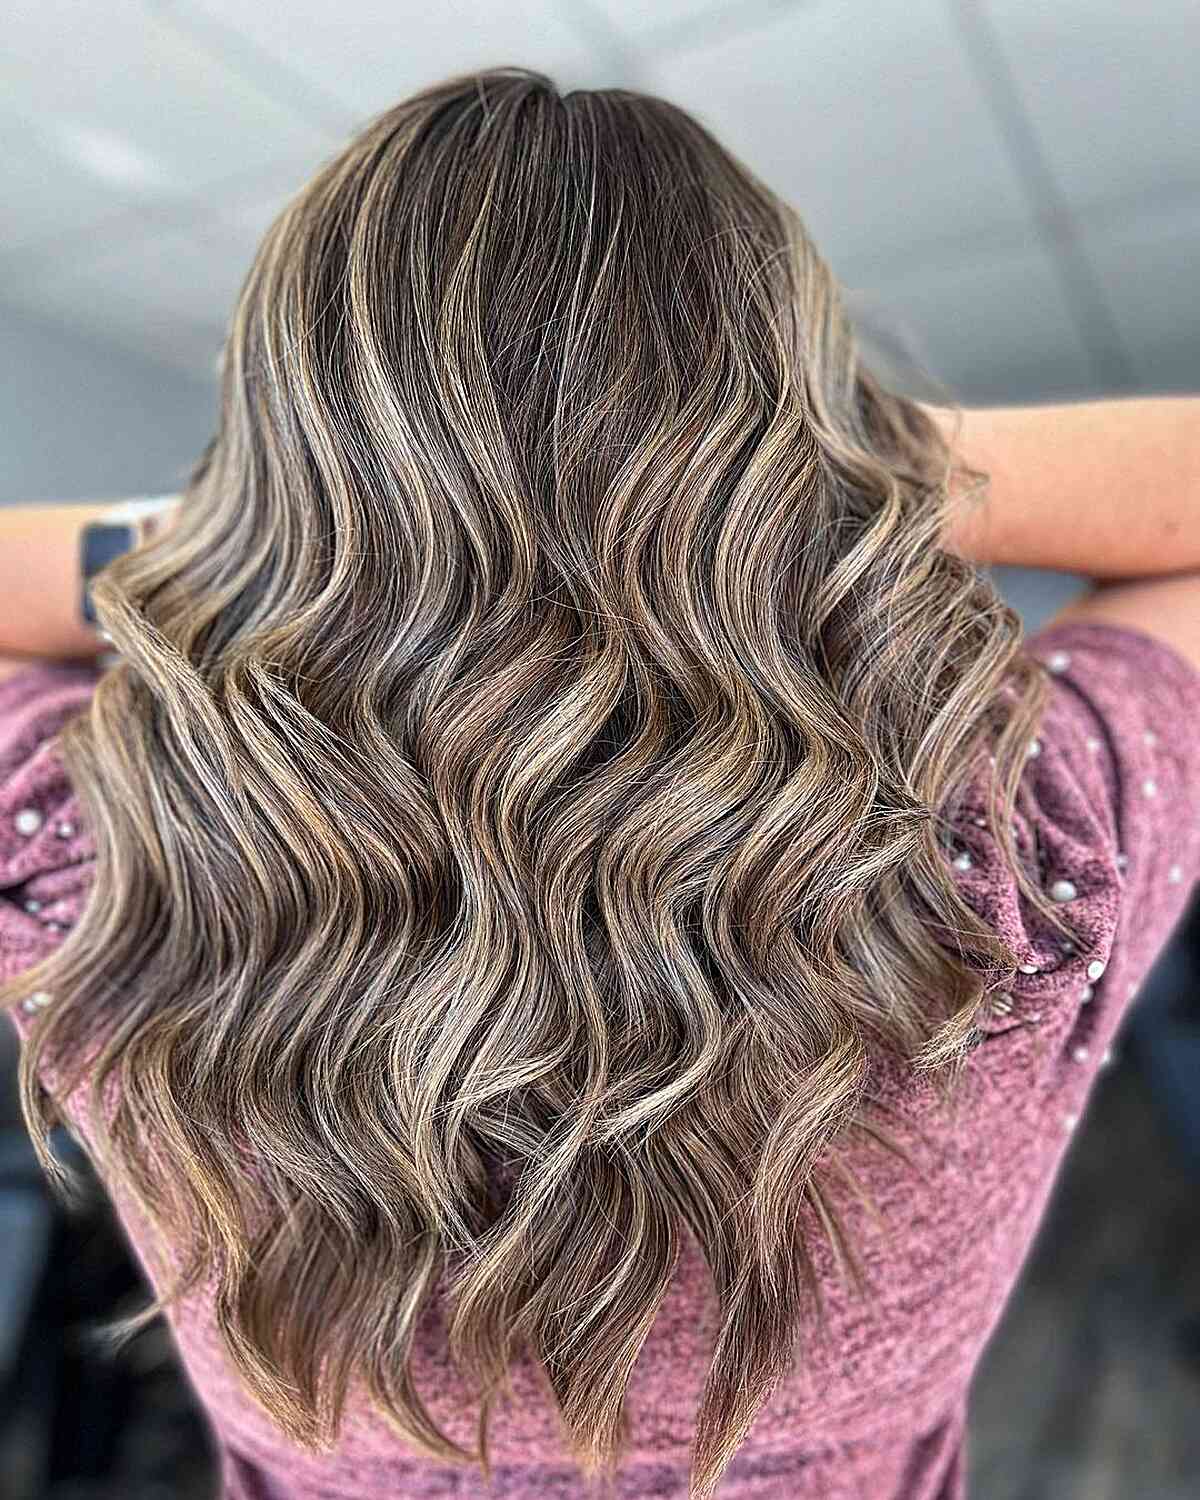 Sun-Kissed Dark Brunette Balayage with Blonde Accents for Medium-Length Layers